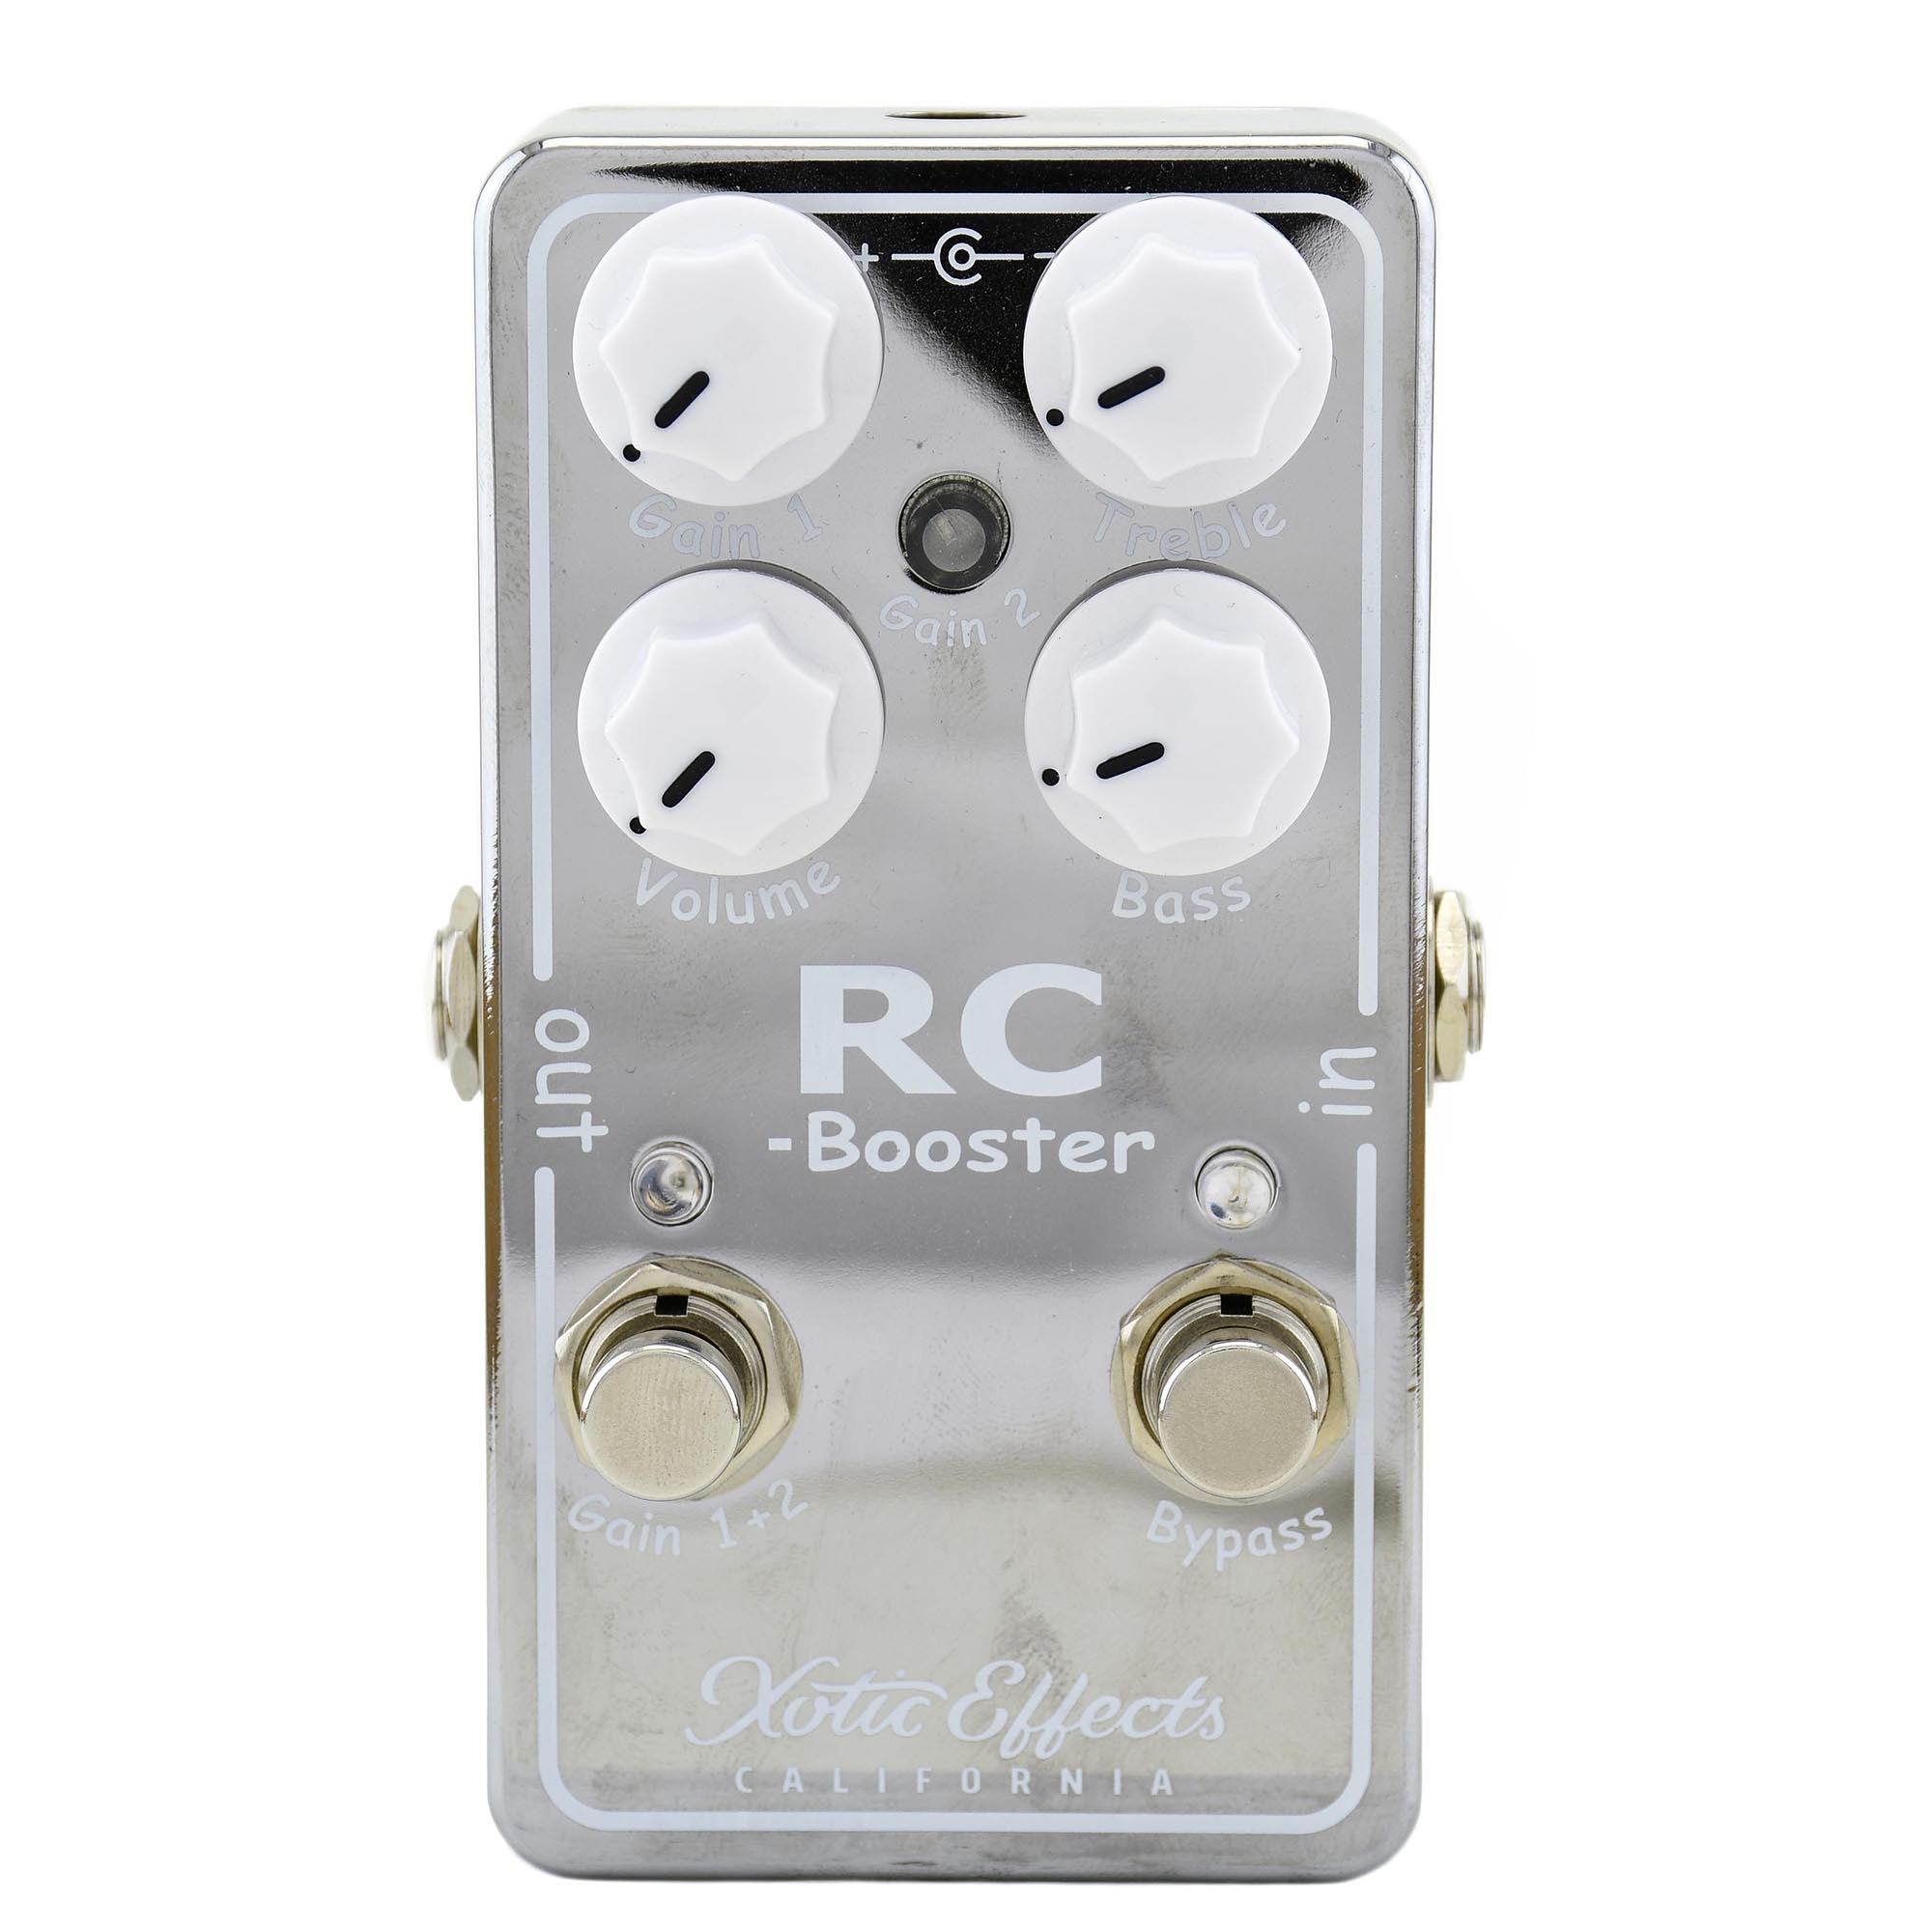 Xotic Rc Booster Guitar Boost Pedal - Version 2